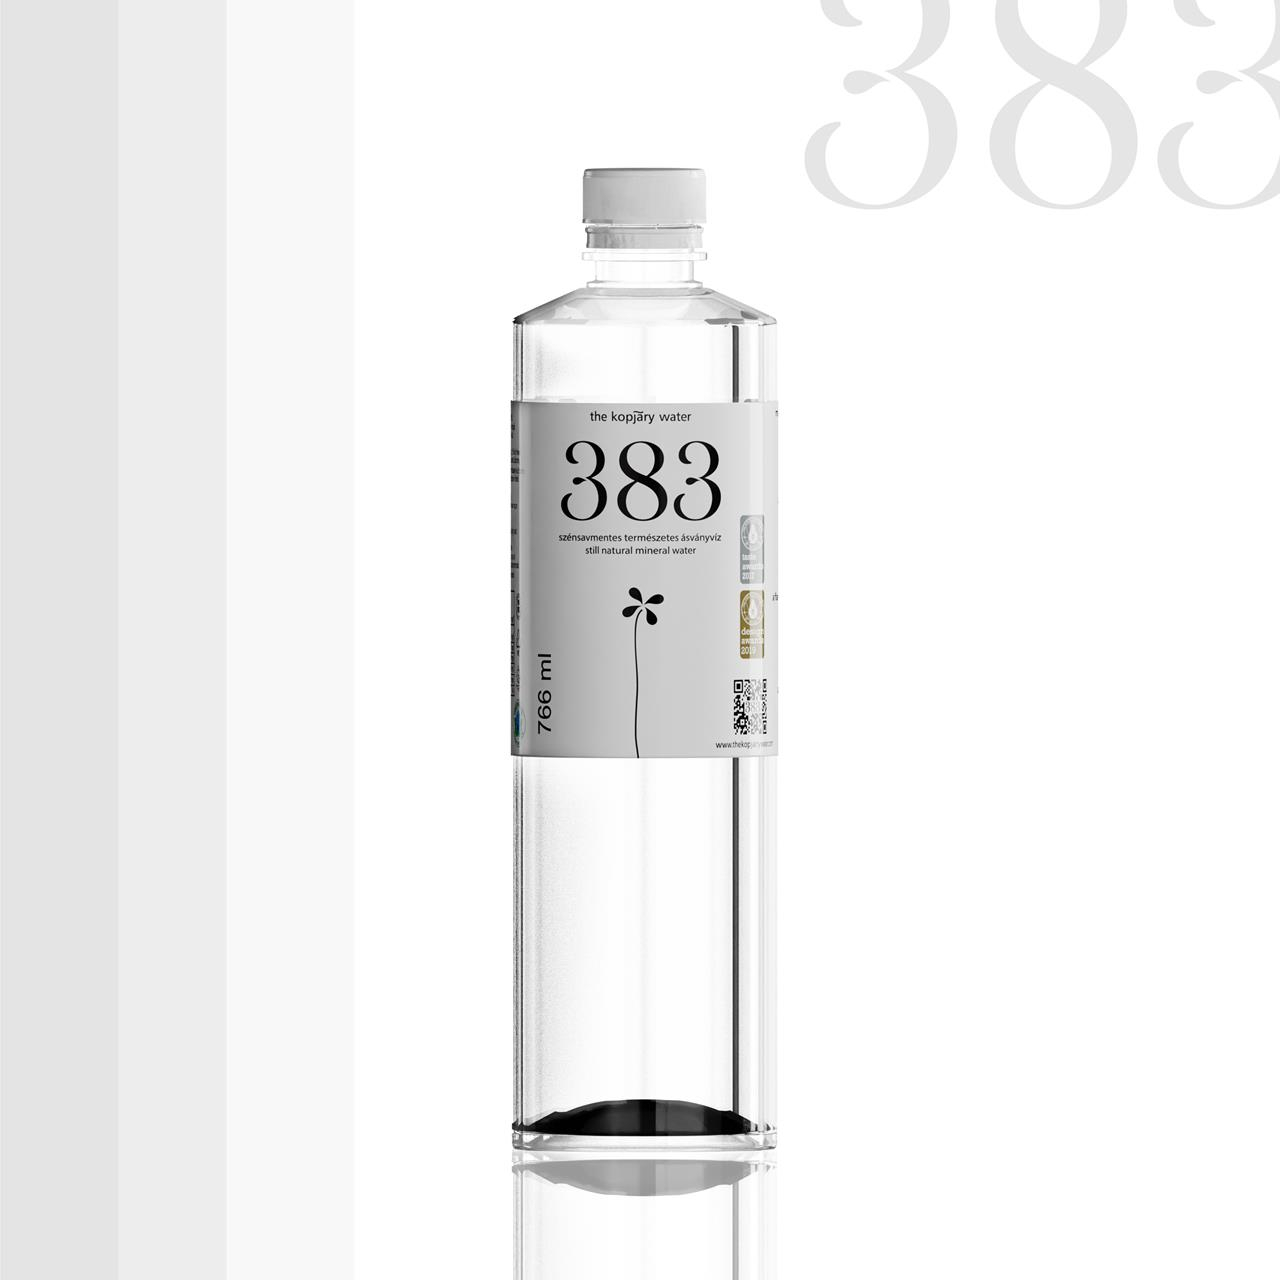 383 THE KOPJARY WATER 766 ml